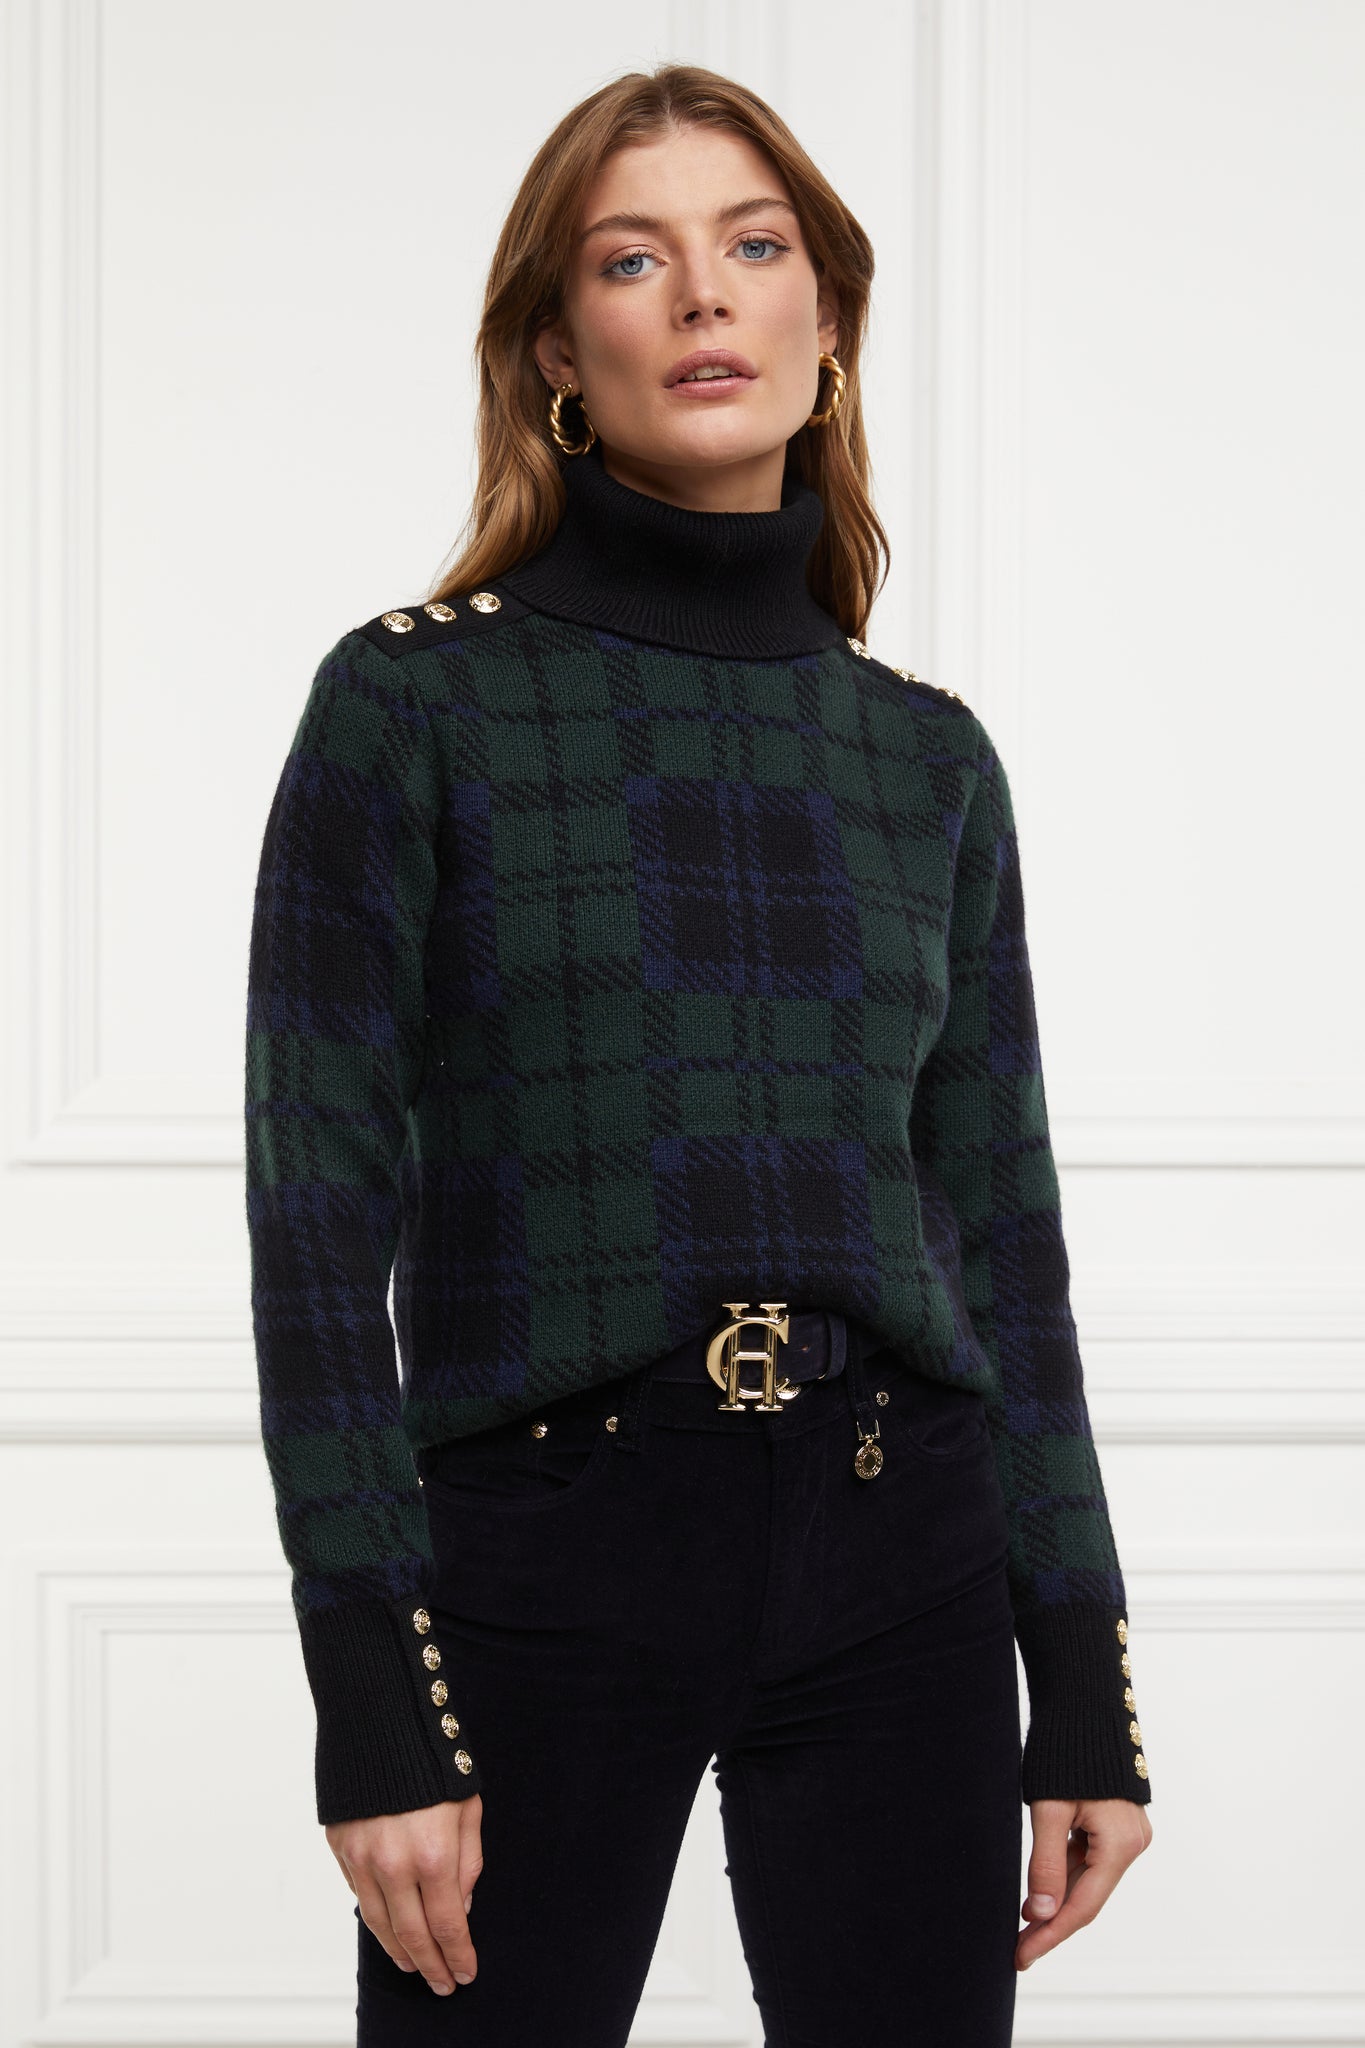 womens classic green navy and black blackwatch jumper with contrast black cuffs, roll neck and split ribbed hem with gold button detail on the cuffs and collar